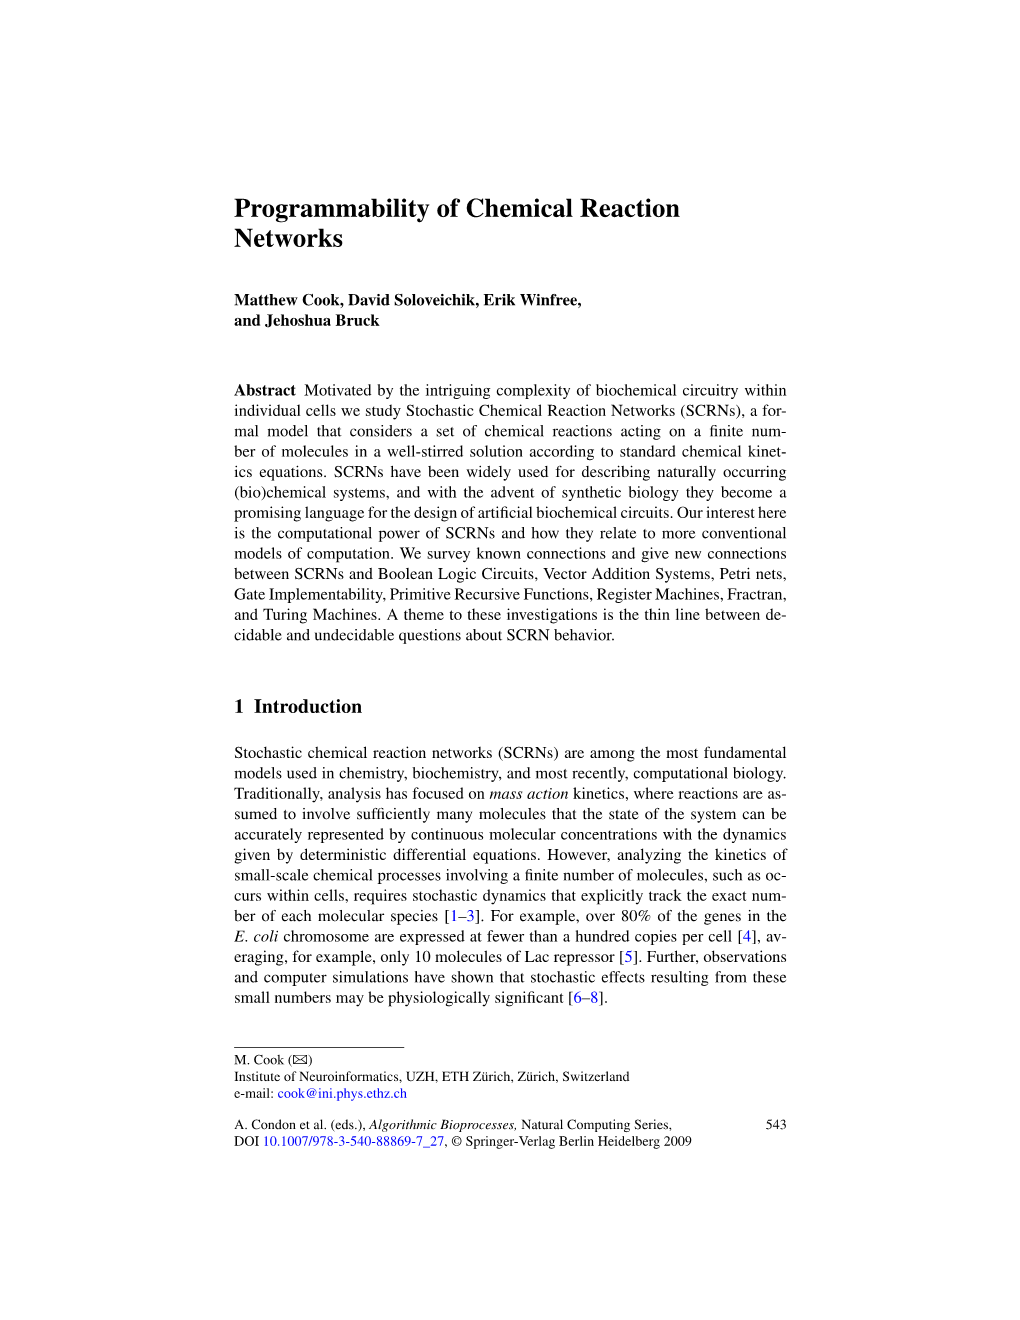 Programmability of Chemical Reaction Networks